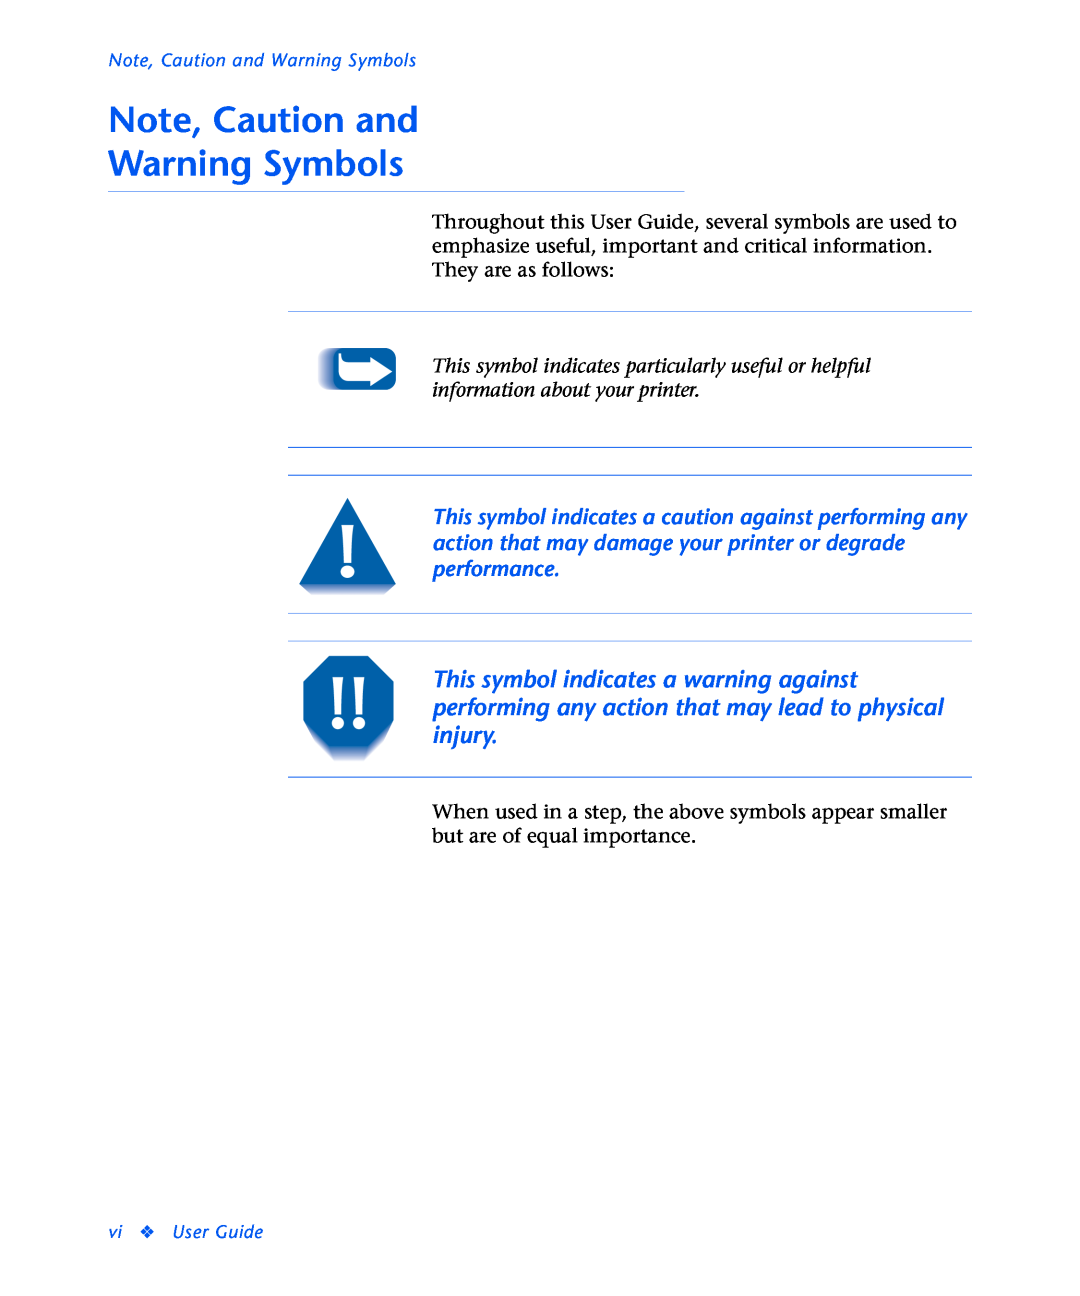 Xerox N2125 manual Note, Caution and Warning Symbols, vi User Guide 